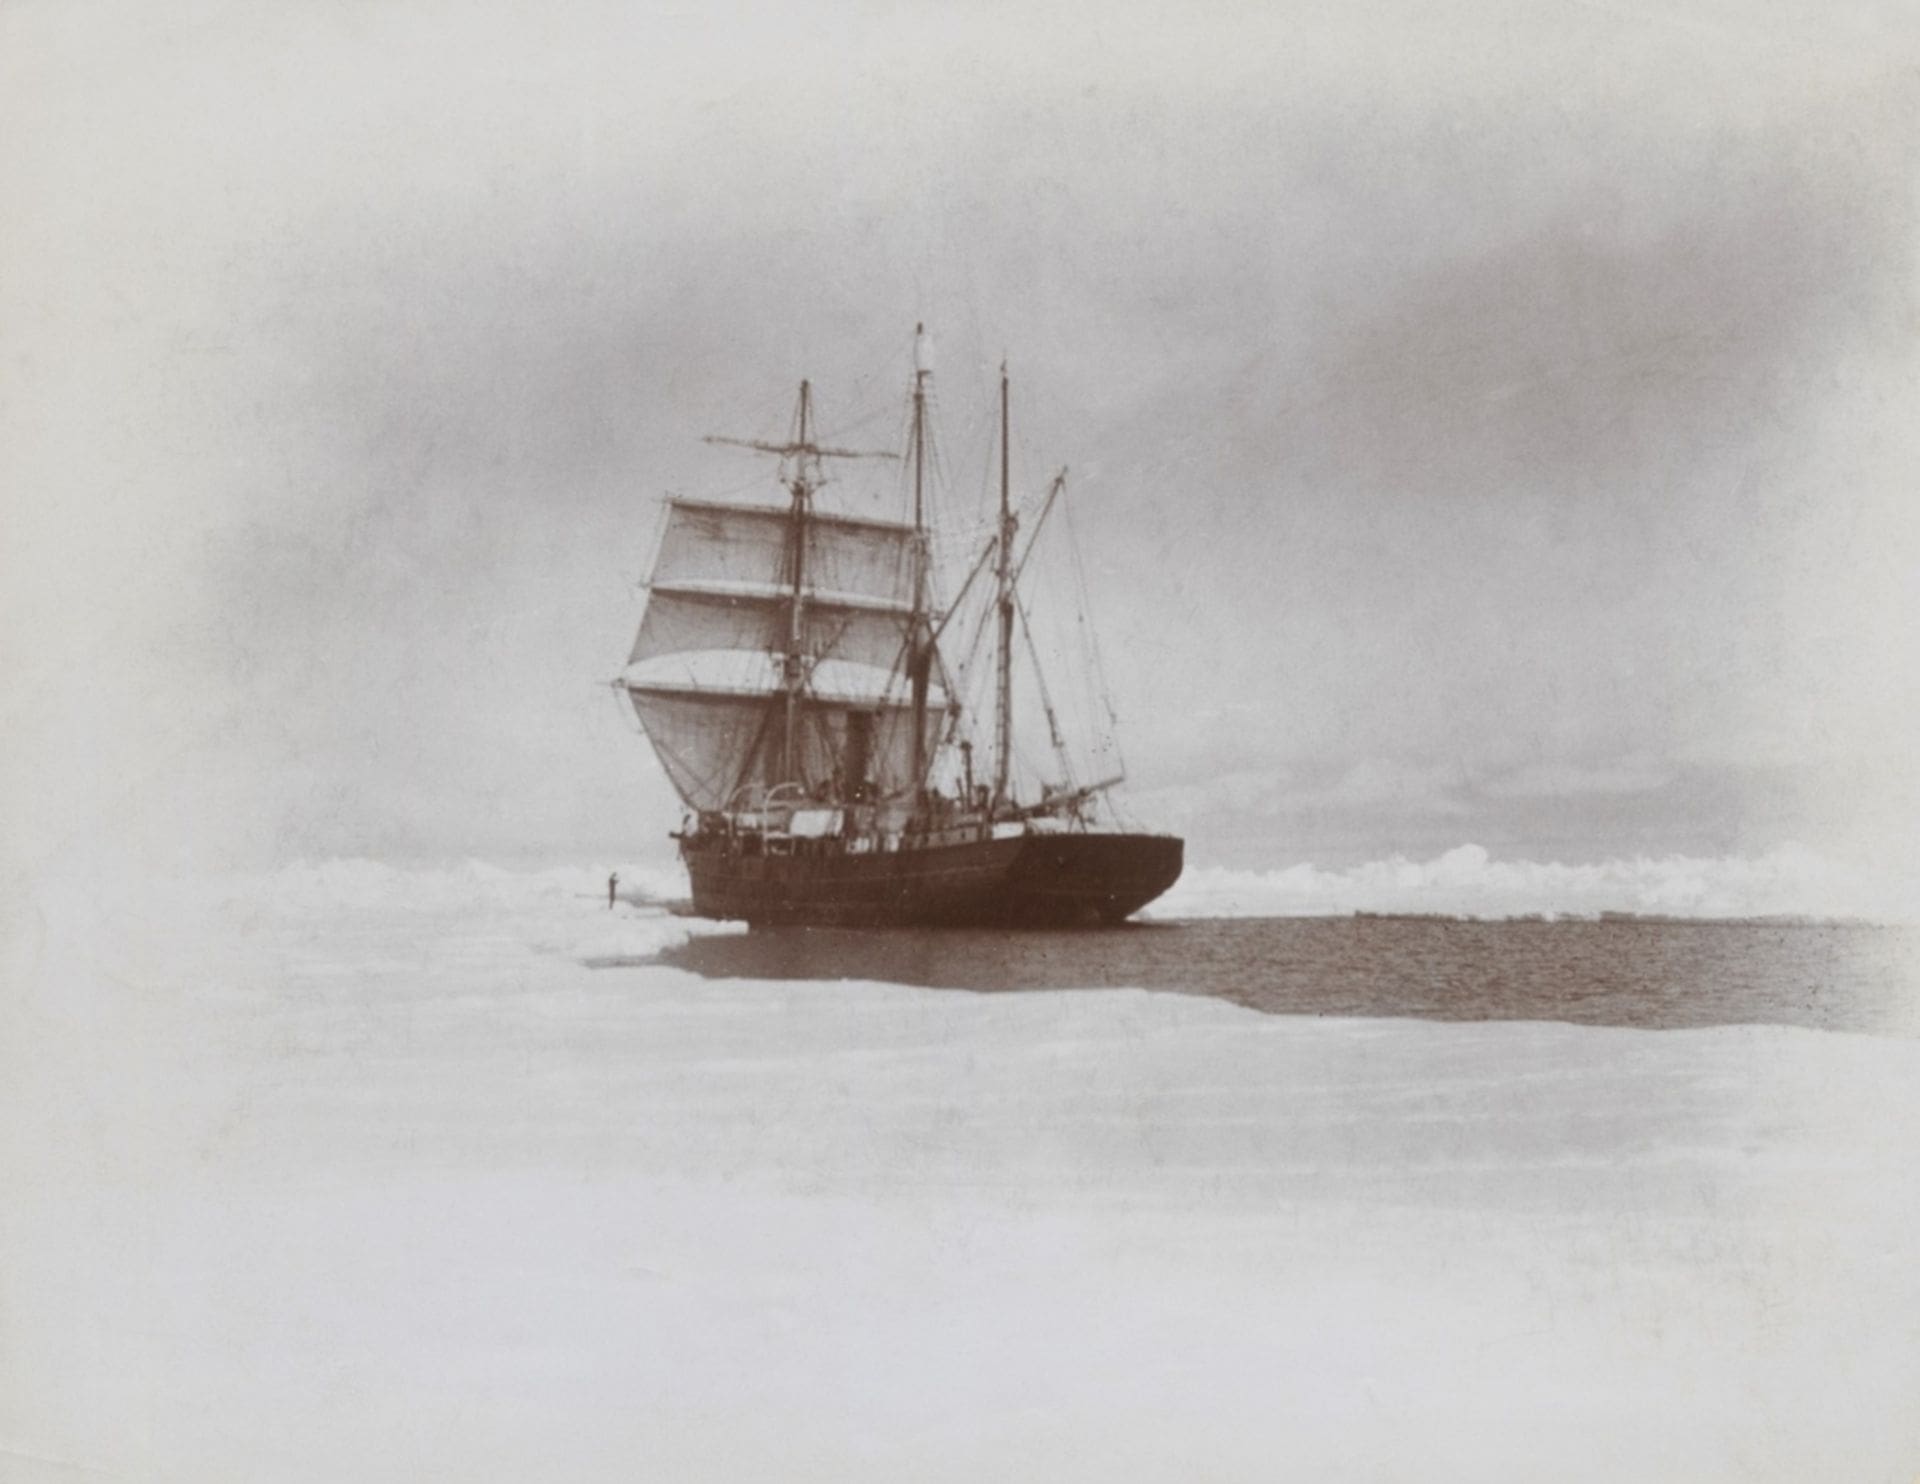 The Nimrod, under sail and steam, forcing her way through the pack ice towards Cape Royds